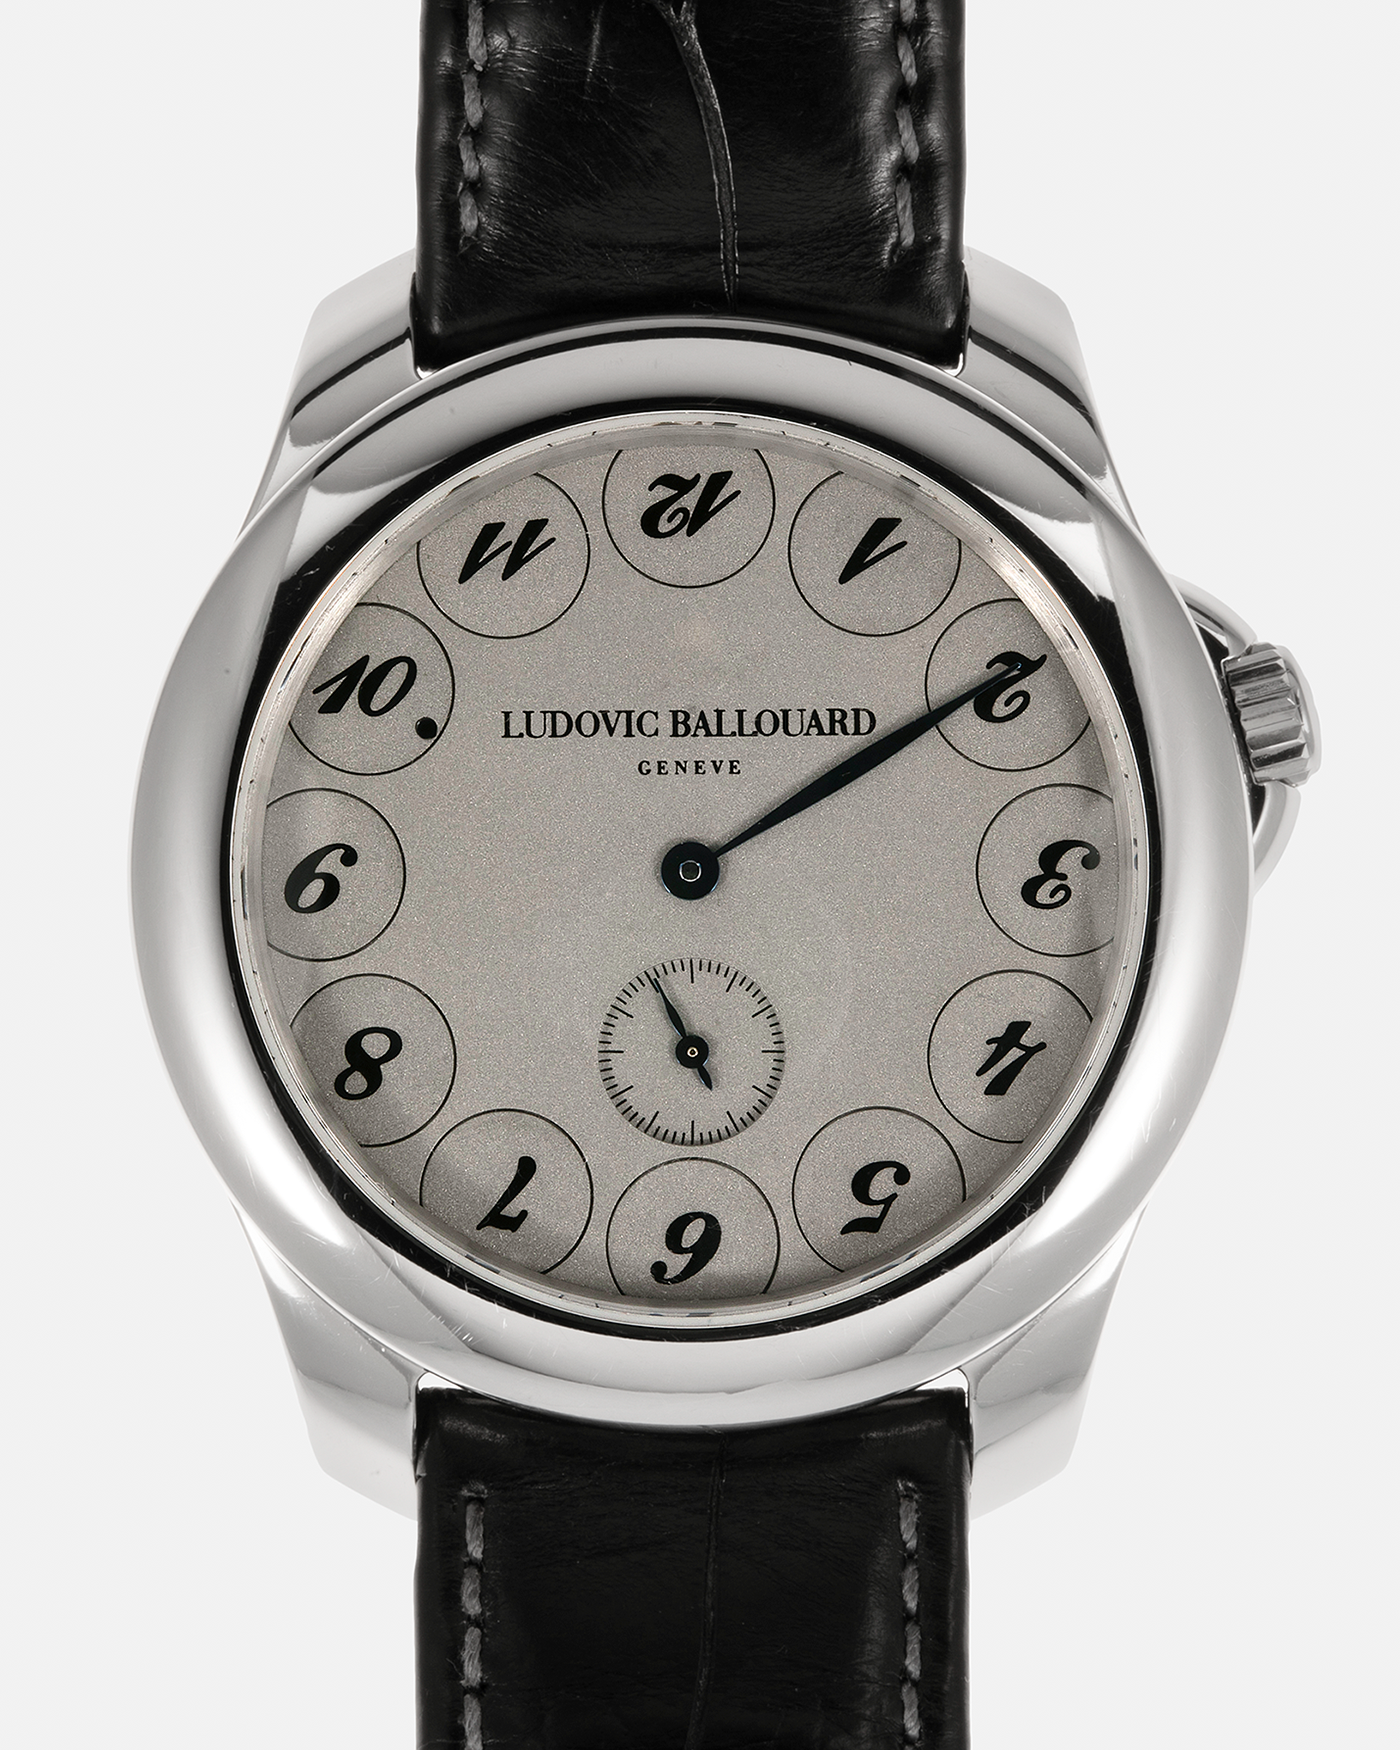 Brand: Ludovic Ballouard Year: 2010’s Model: Upside Down Material: Platinum 950 Movement: Ludovic Ballouard Cal. B01, Manual-Winding Case Dimensions: 41mm x 10.5mm Lug Width: 20mm Strap: Ludovic Ballouard Black Alligator Leather Strap with Signed Platinum 950 Tang Buckle